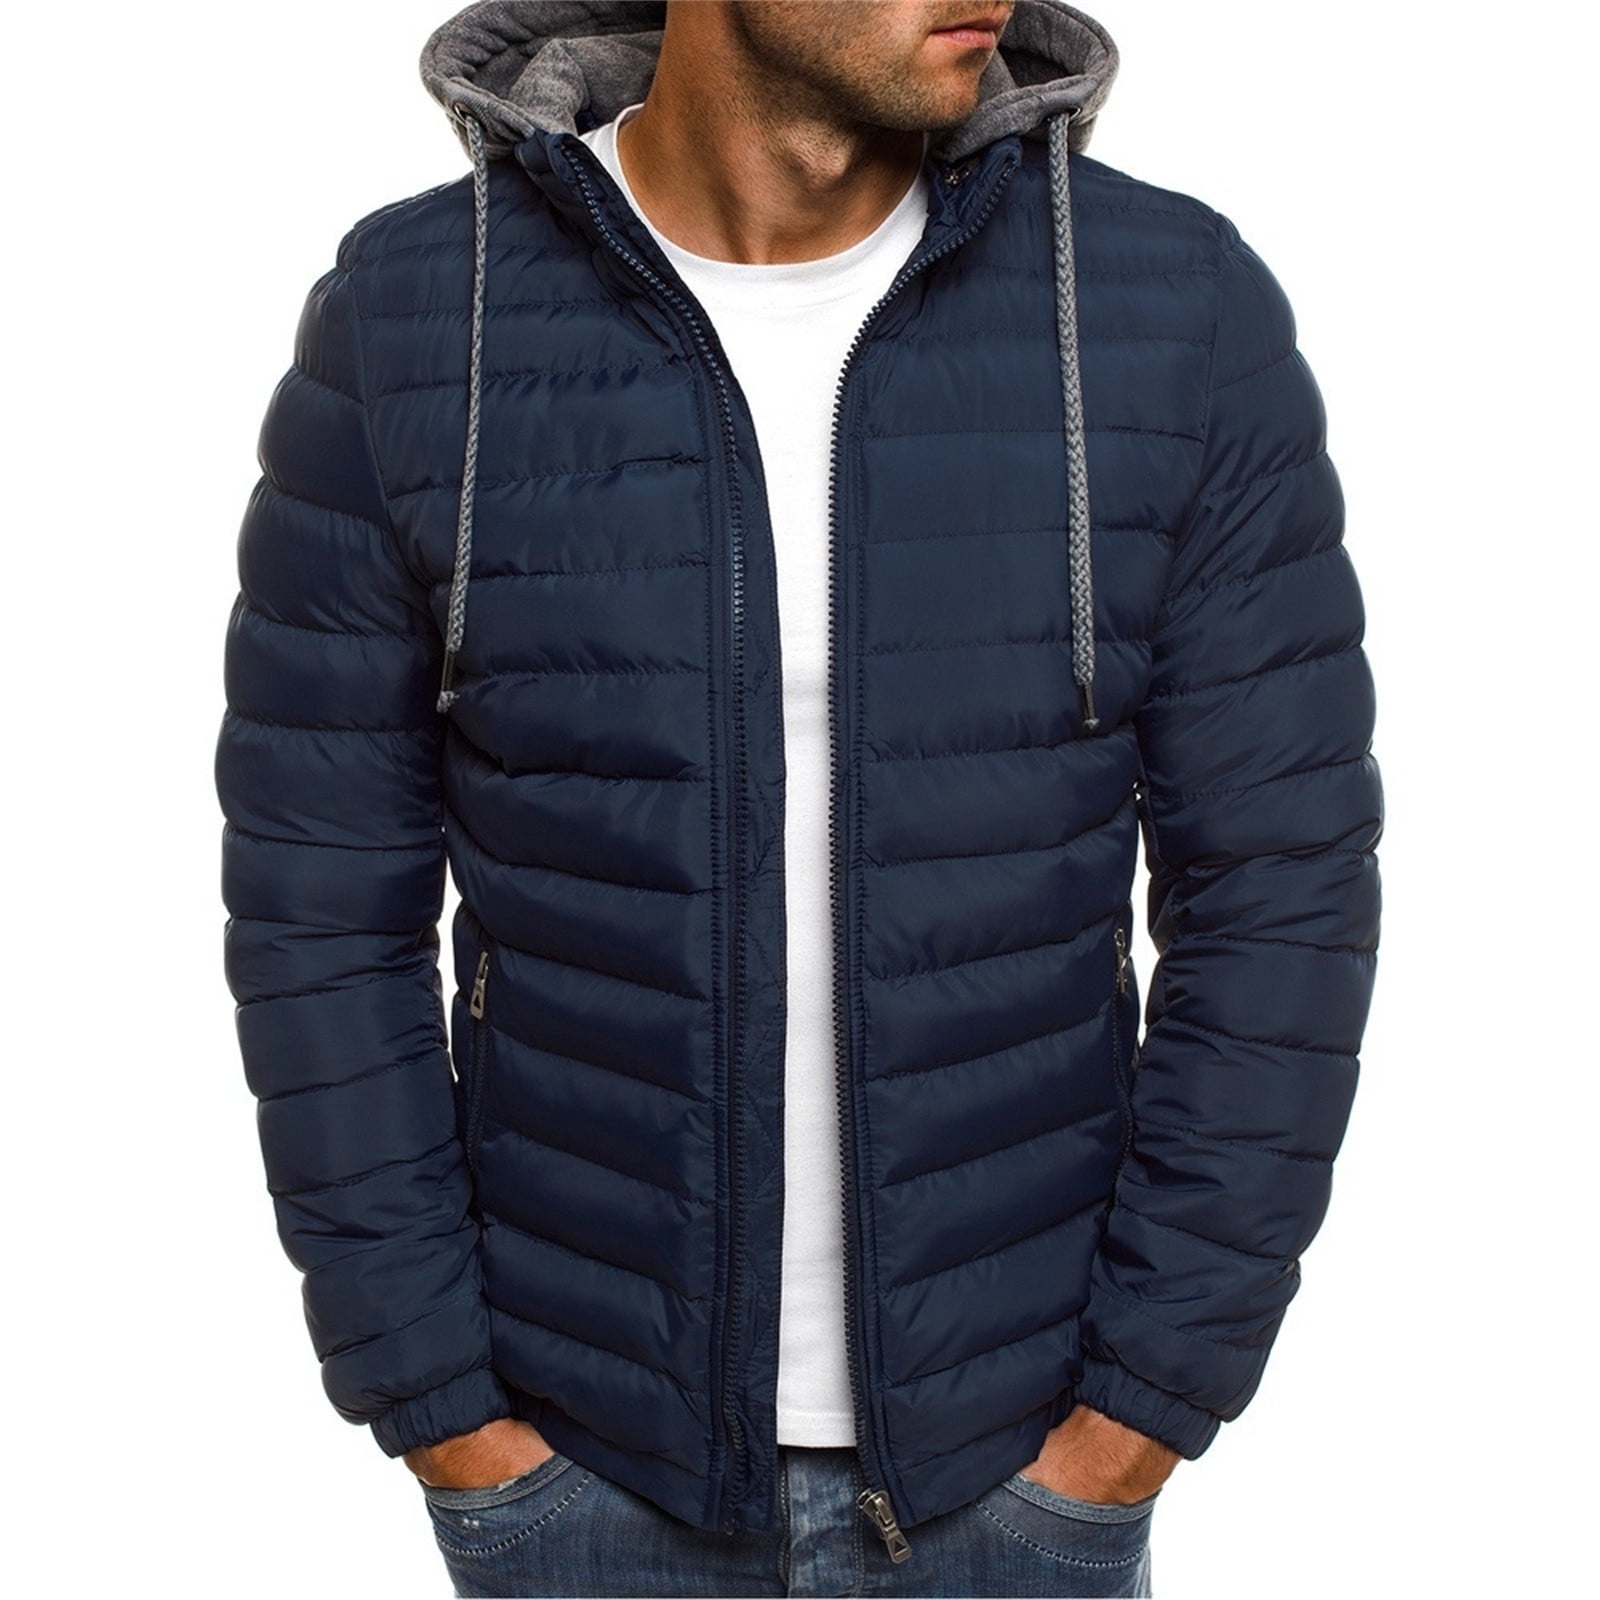 Zpanxa Mens Winter Coats Men's Solid Color Hooded Jacket Cotton Padded ...